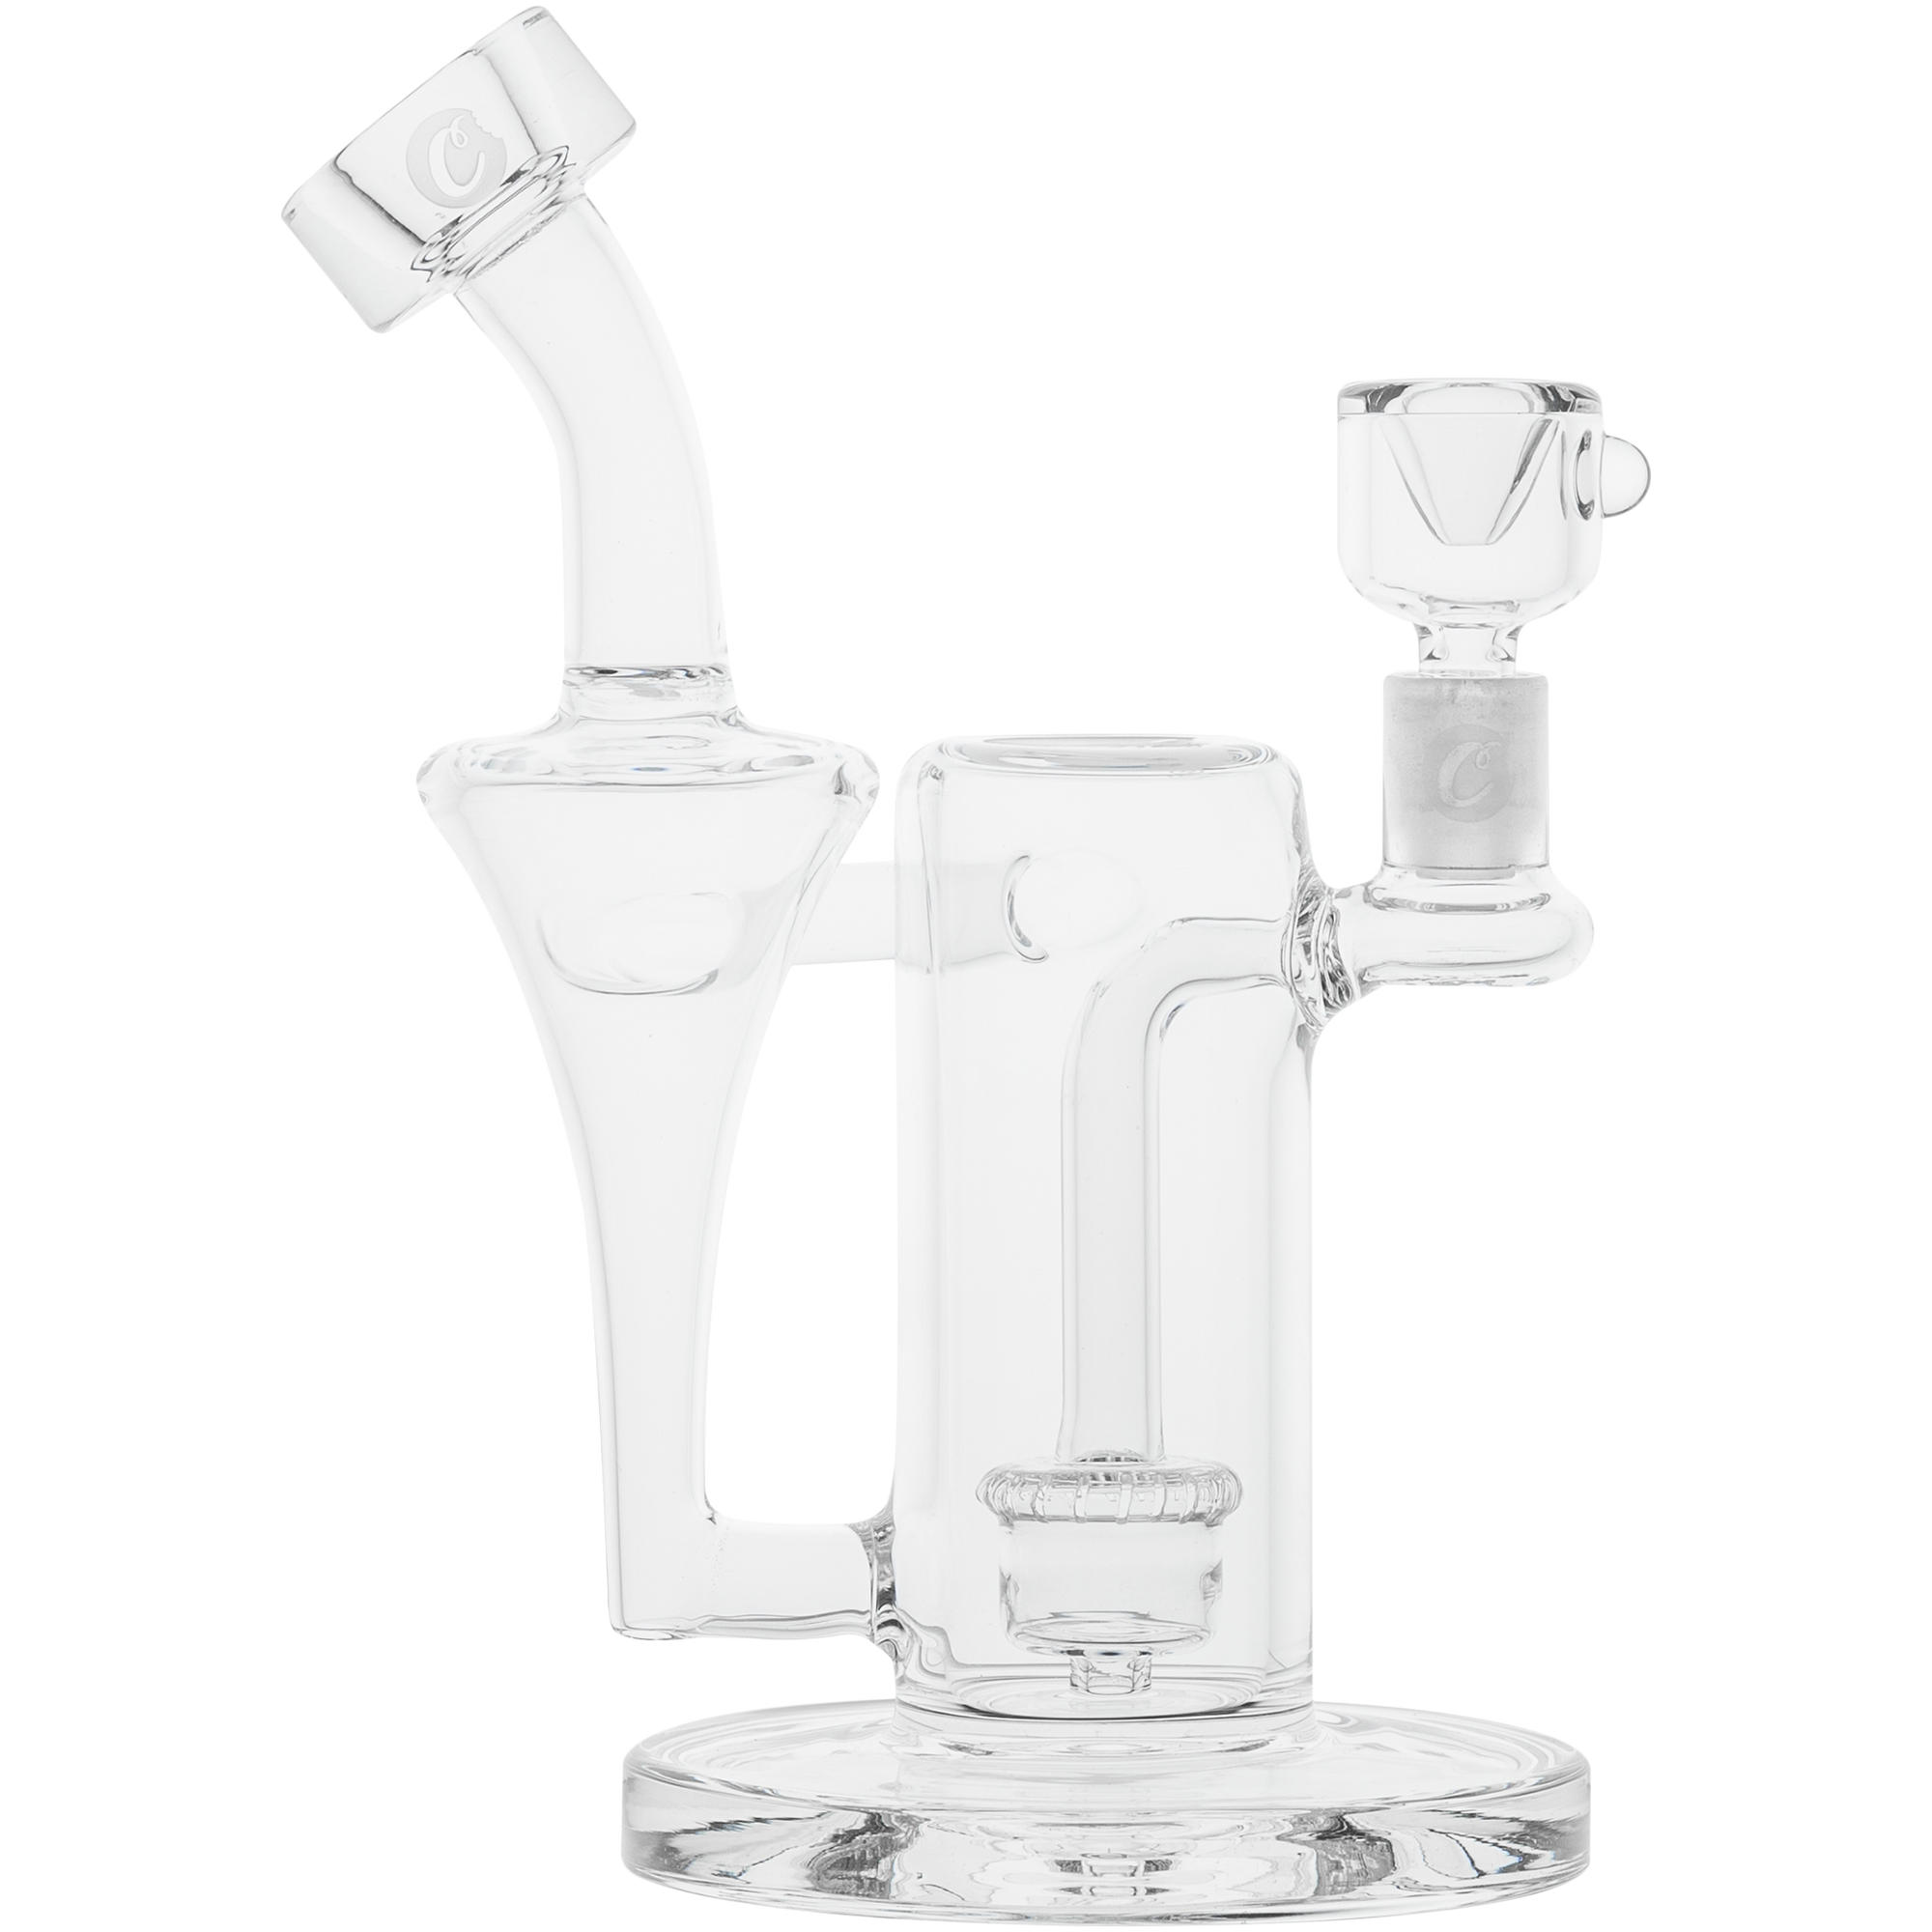 Cookies OG Cycler Dab Rig (ONLINE ONLY)